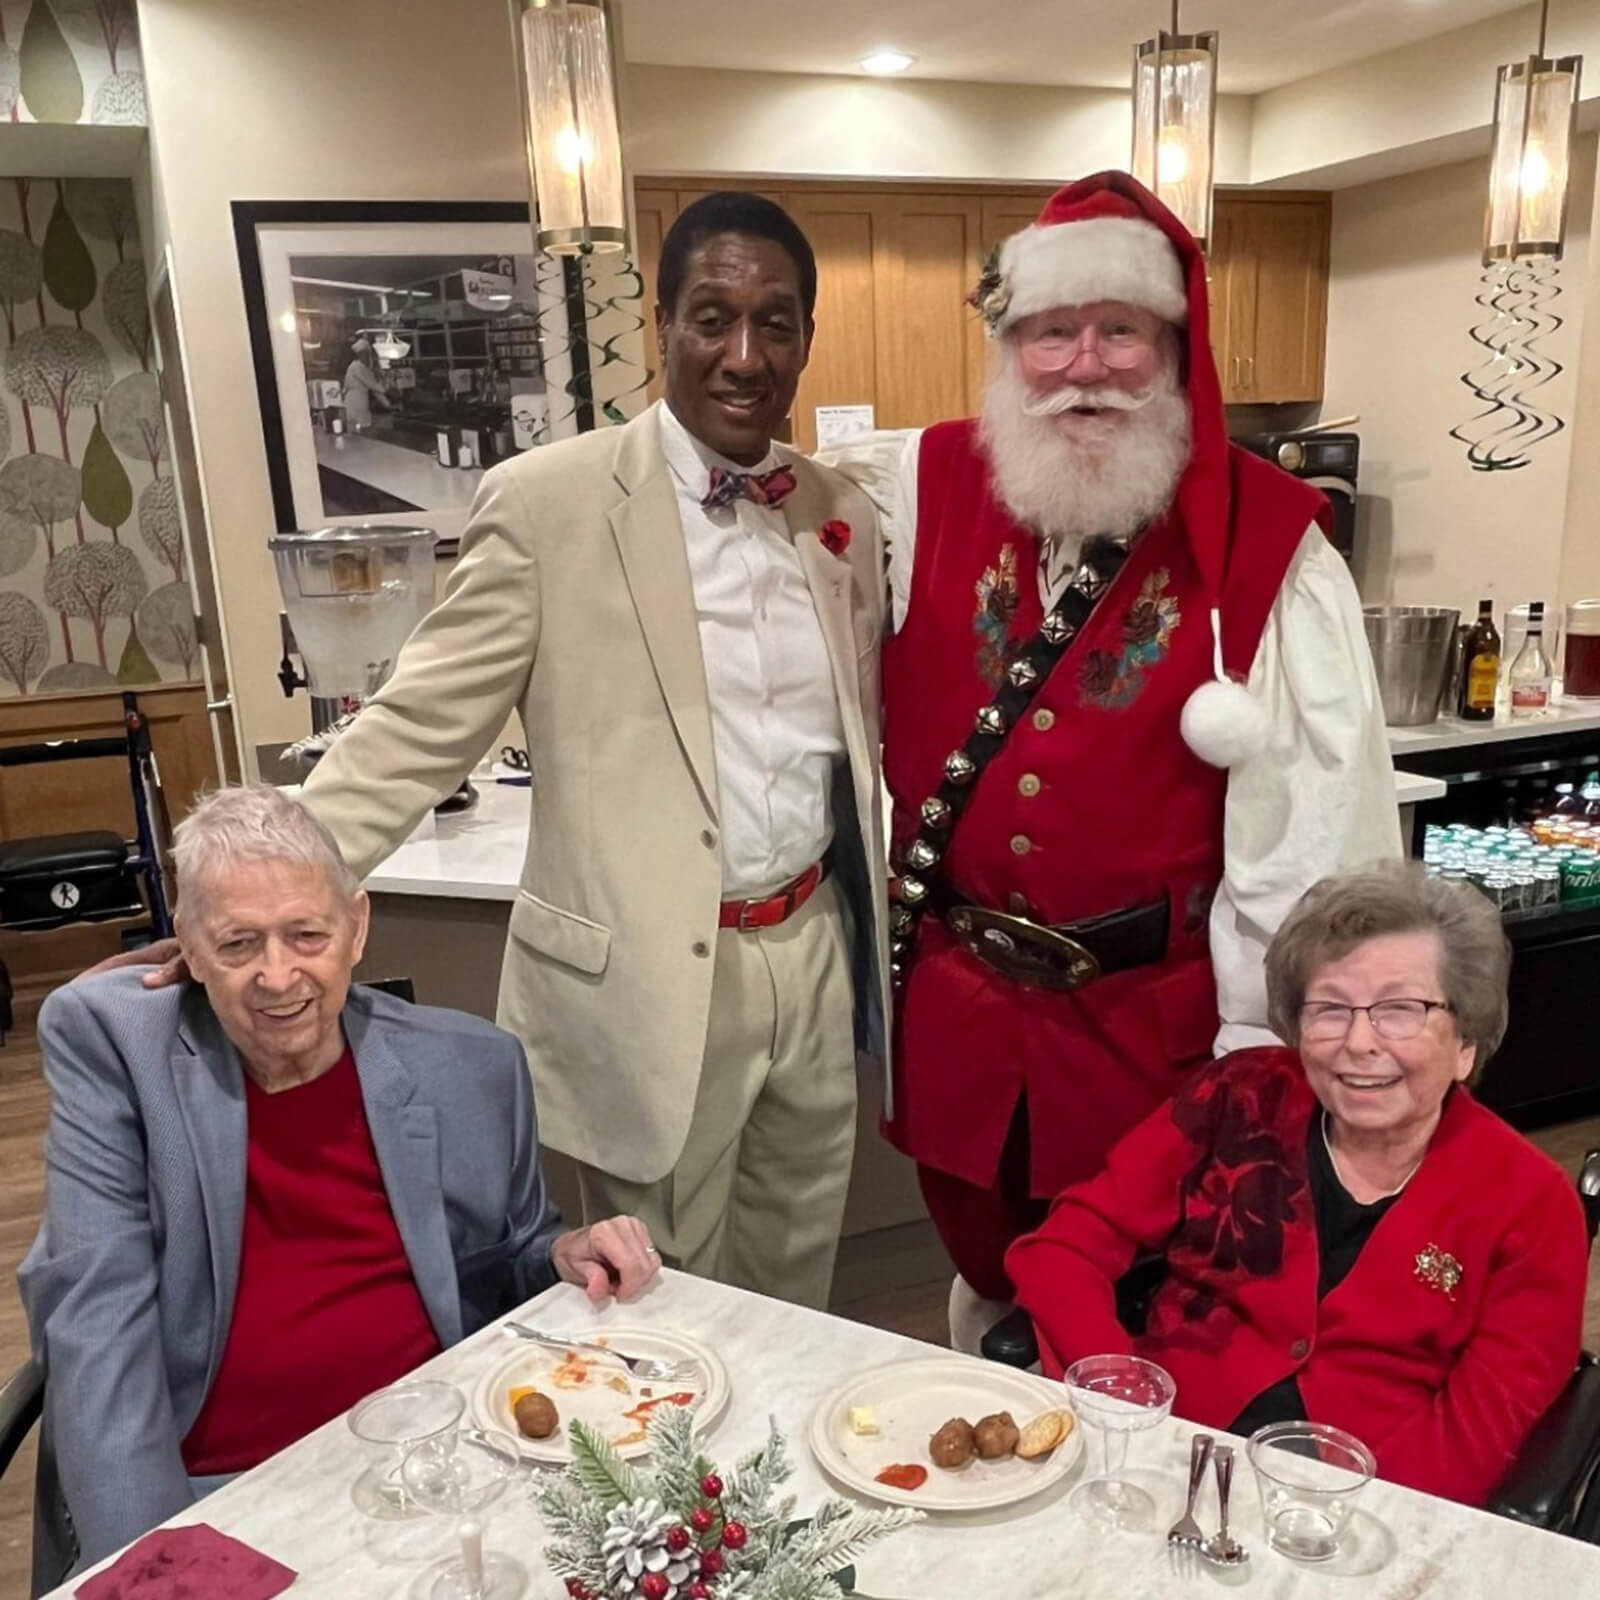 Seniors at The Waters on 50th in Minneapolis having a delightful time with Santa during a holiday party.